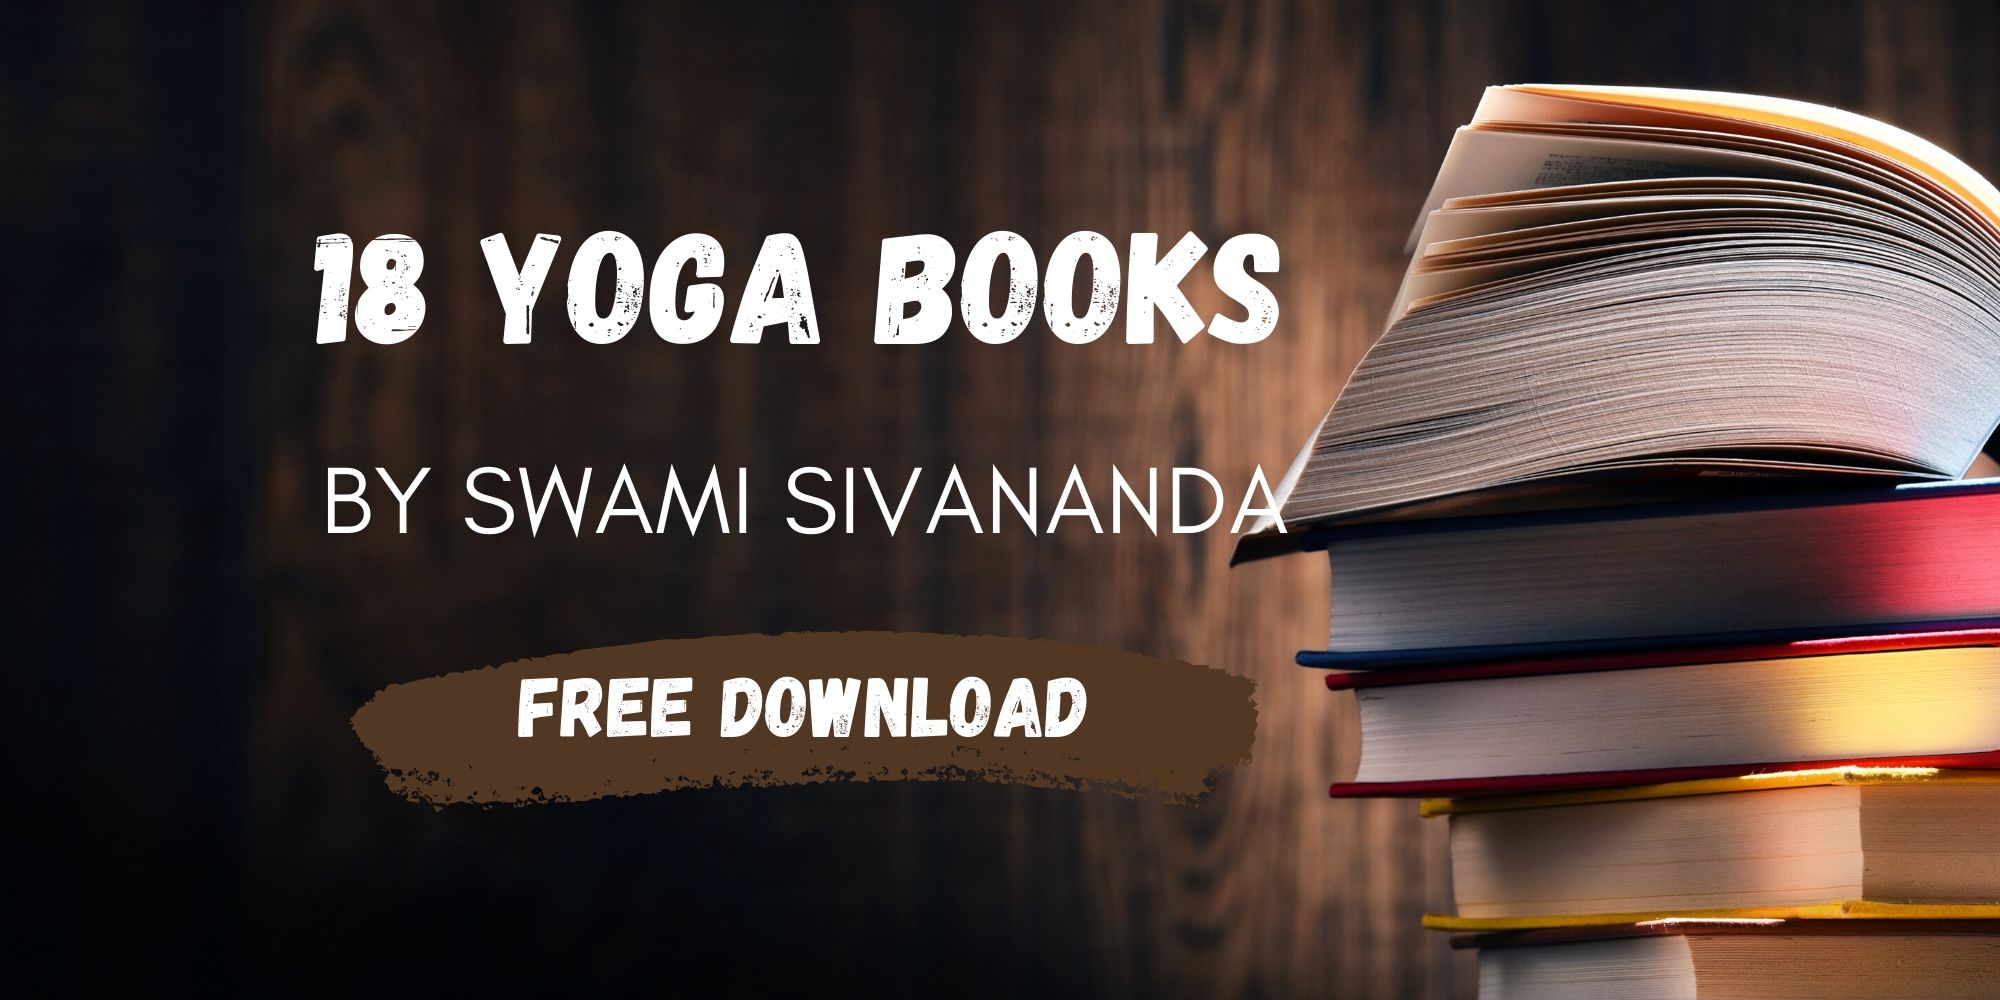 109 books on Yoga and Philosophy (Free Download) - PDF format